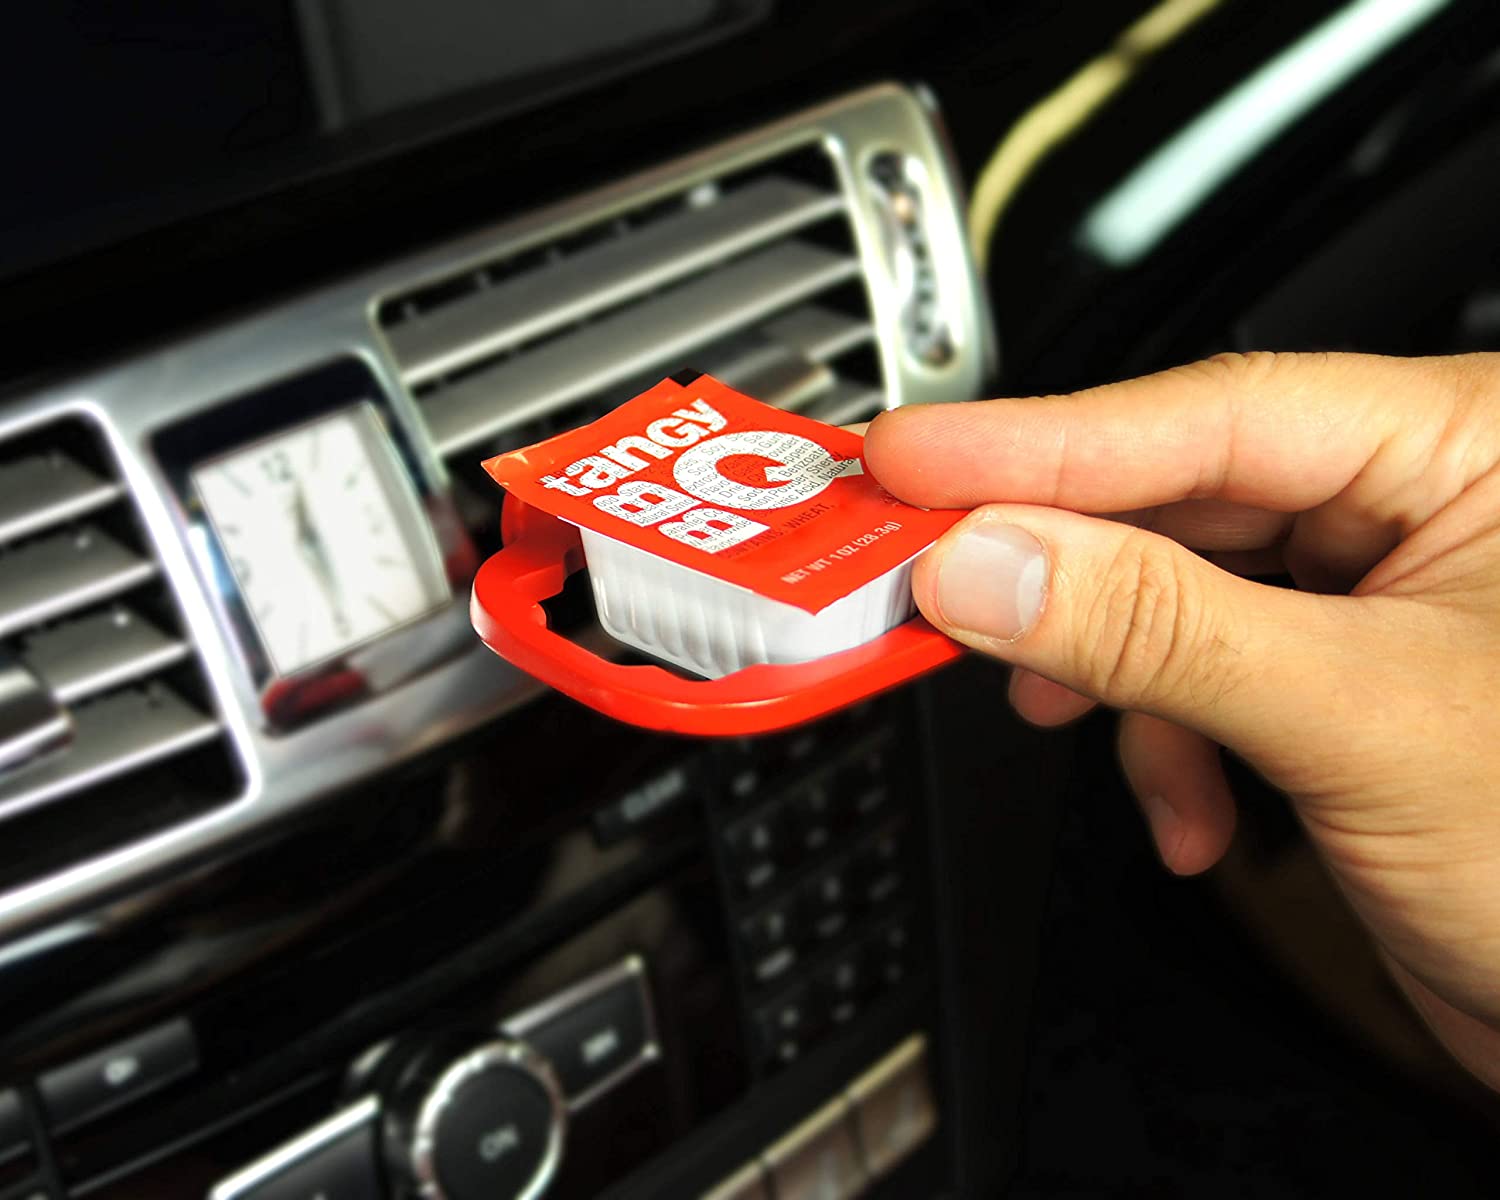 A sauce holder which is plugged into the vent of a car and is designed to hold your dipping sauce. A hand is placing some tangy BBQ sauce into the tray.